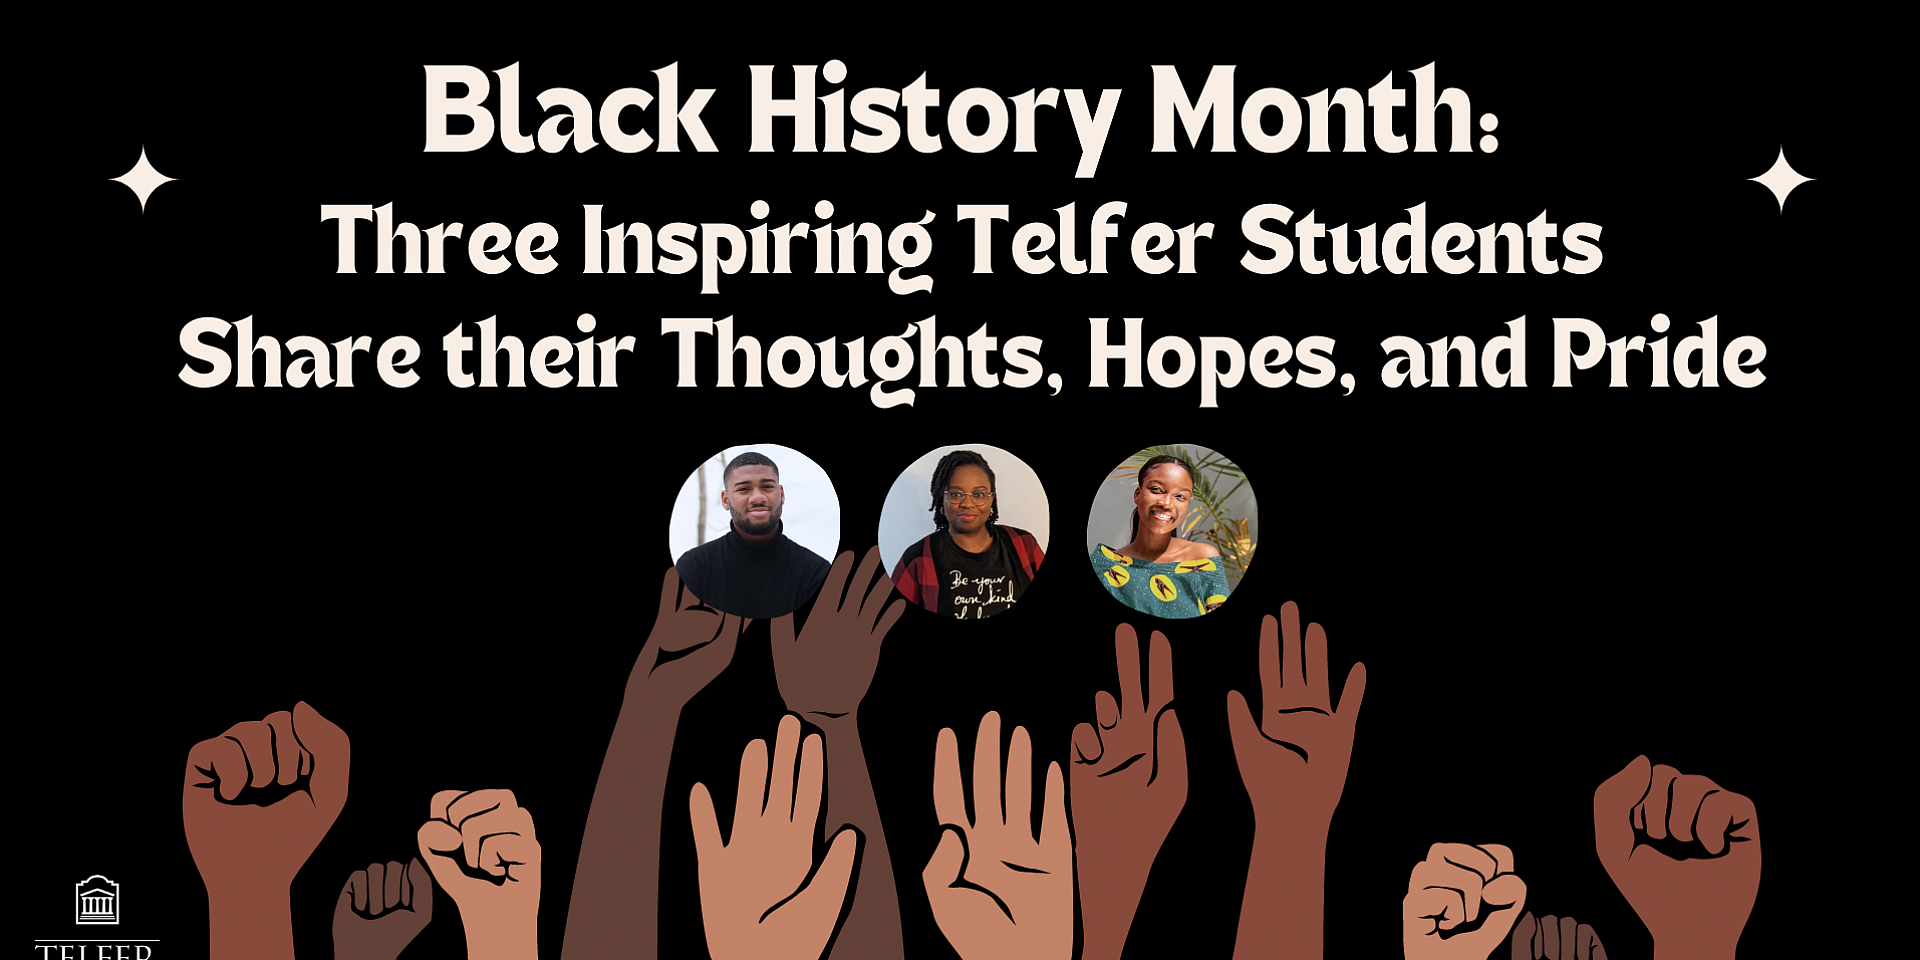 Black History Month: Three Inspiring Telfer Students Share their Thoughts, Hopes, and Pride